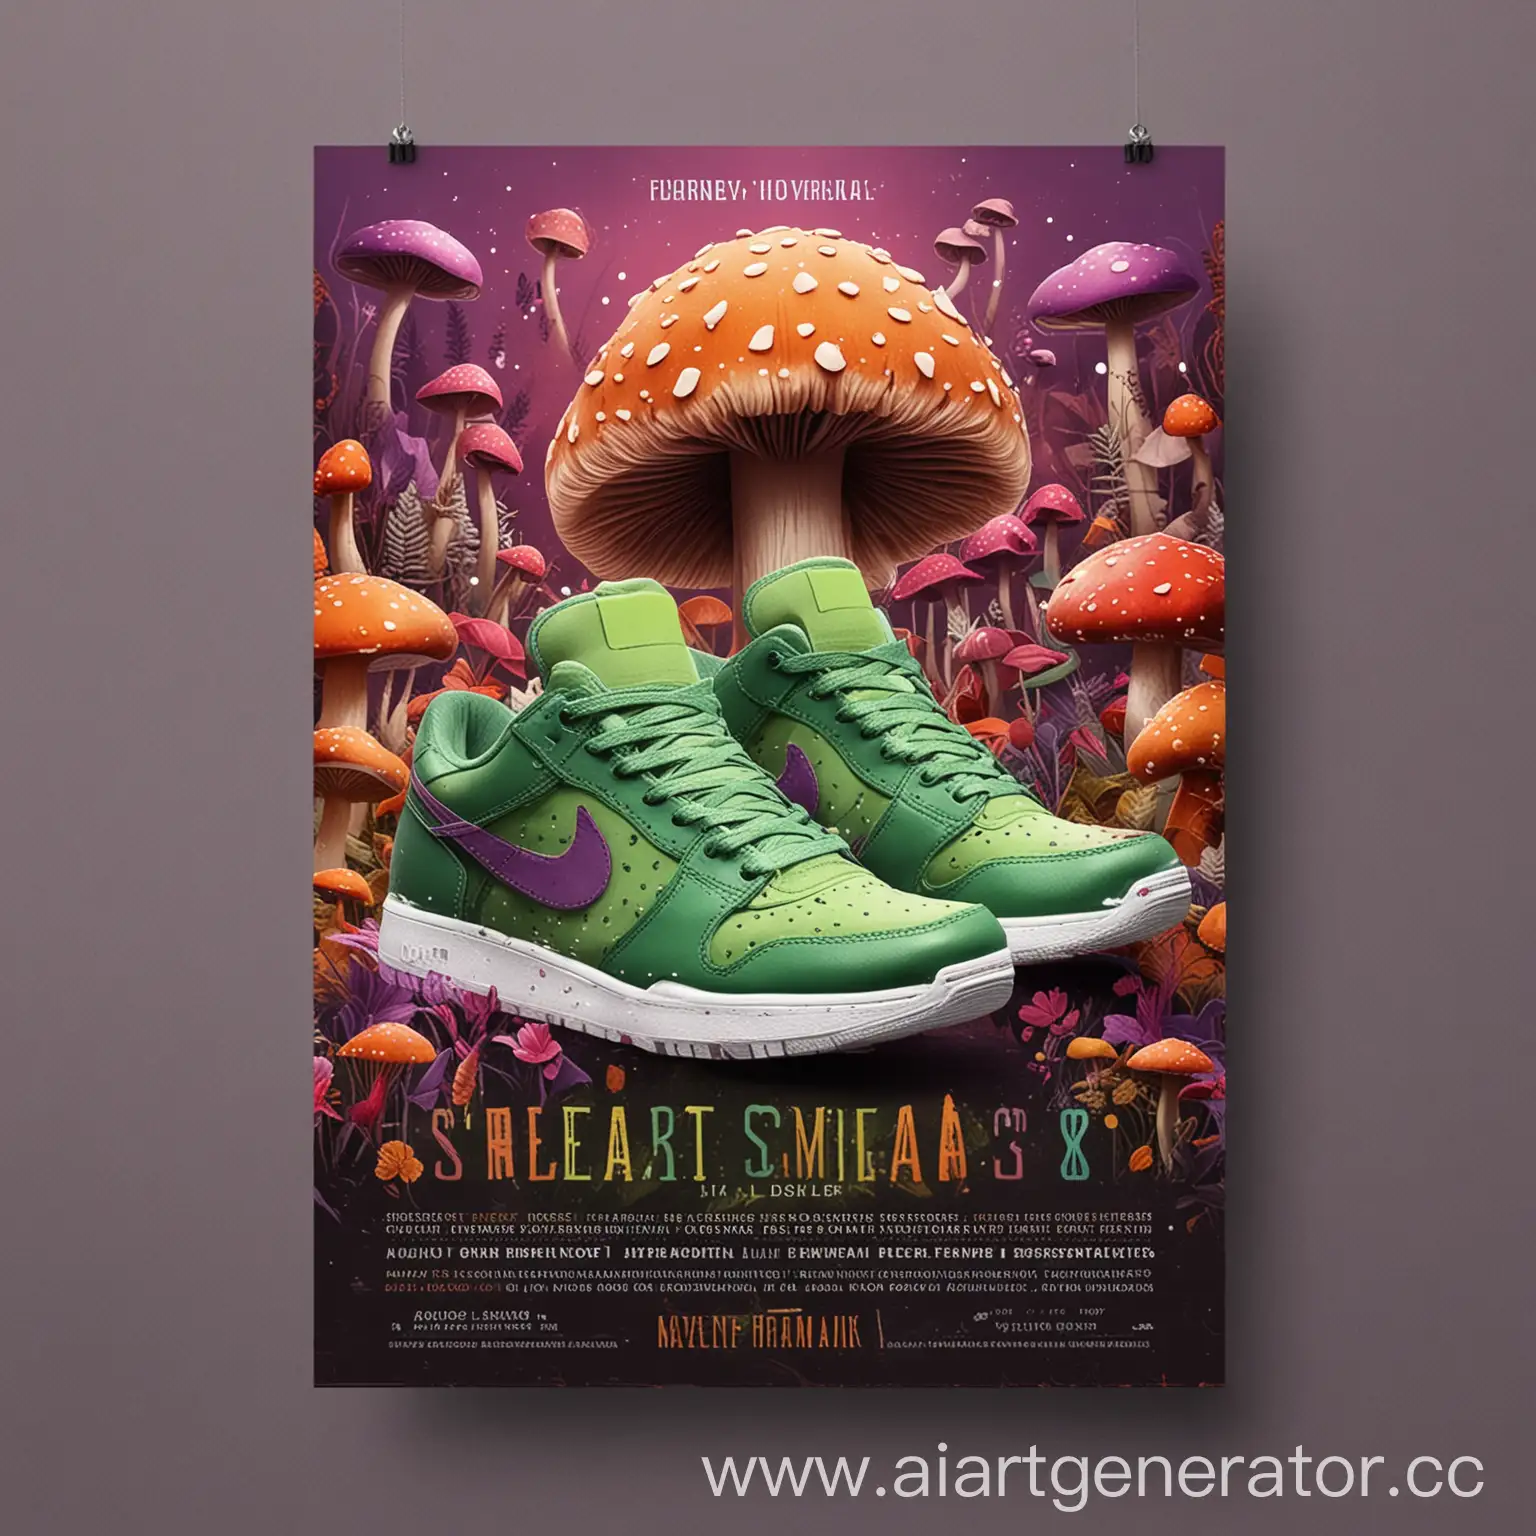 Magical-Mushroom-Sneaker-Adventure-Vibrant-Background-for-Mushrooms-and-Sneakers-Flyer